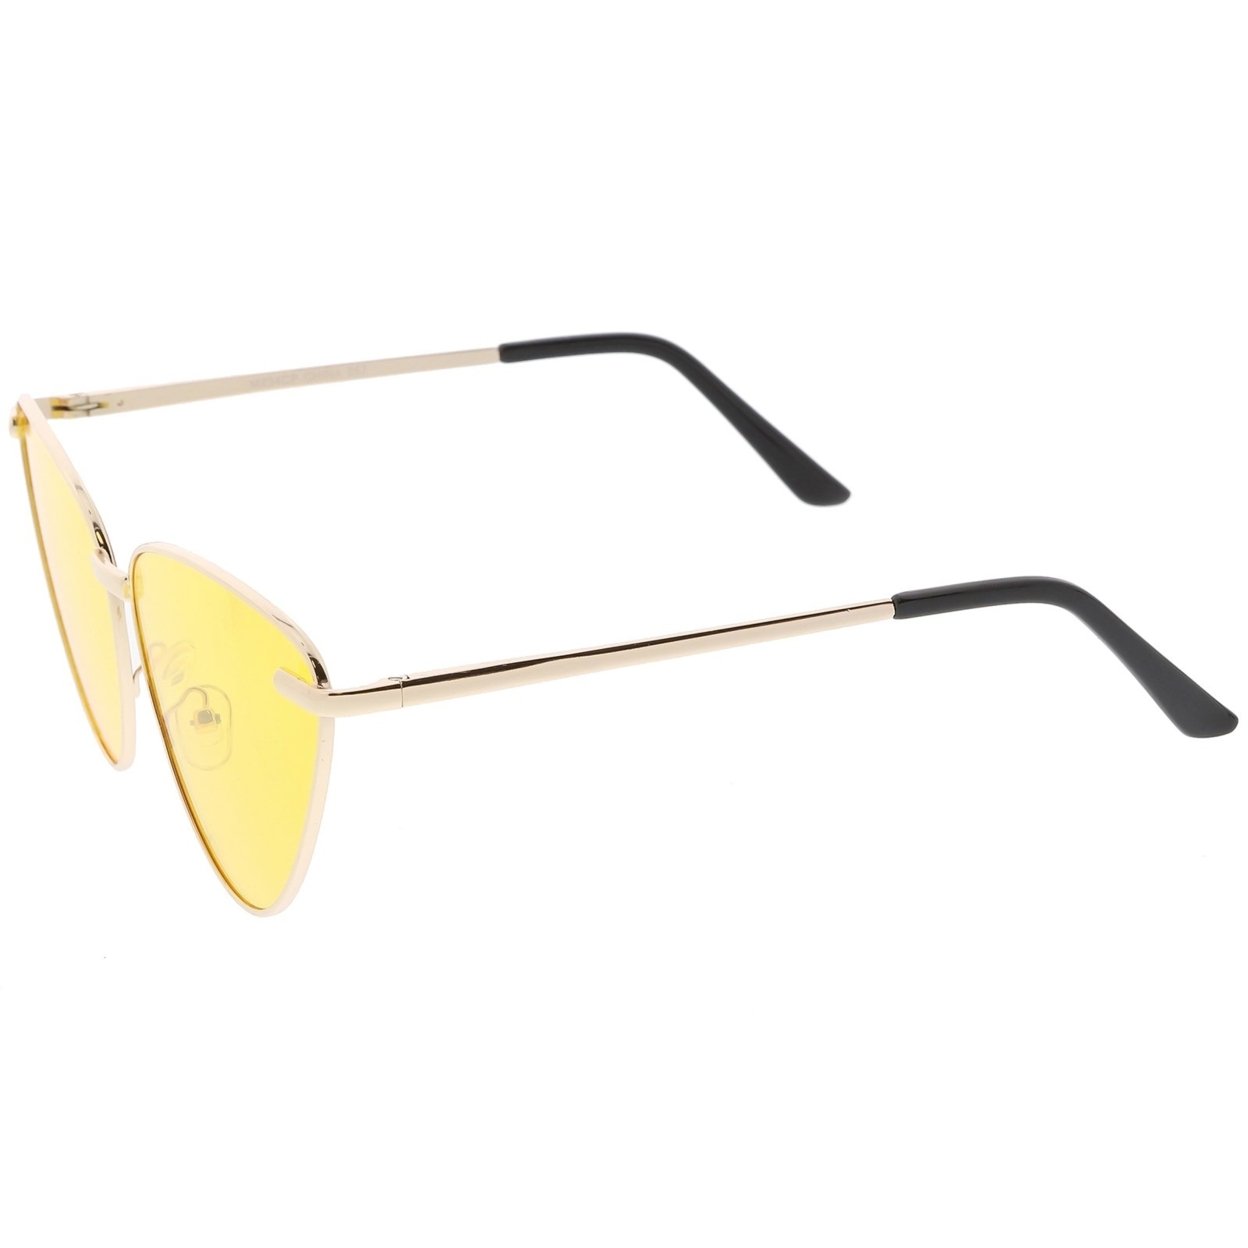 Oversize Cat Eye Sunglasses Thin Metal Frame Color Tinted Flat Lens 64mm - Gold / Blue